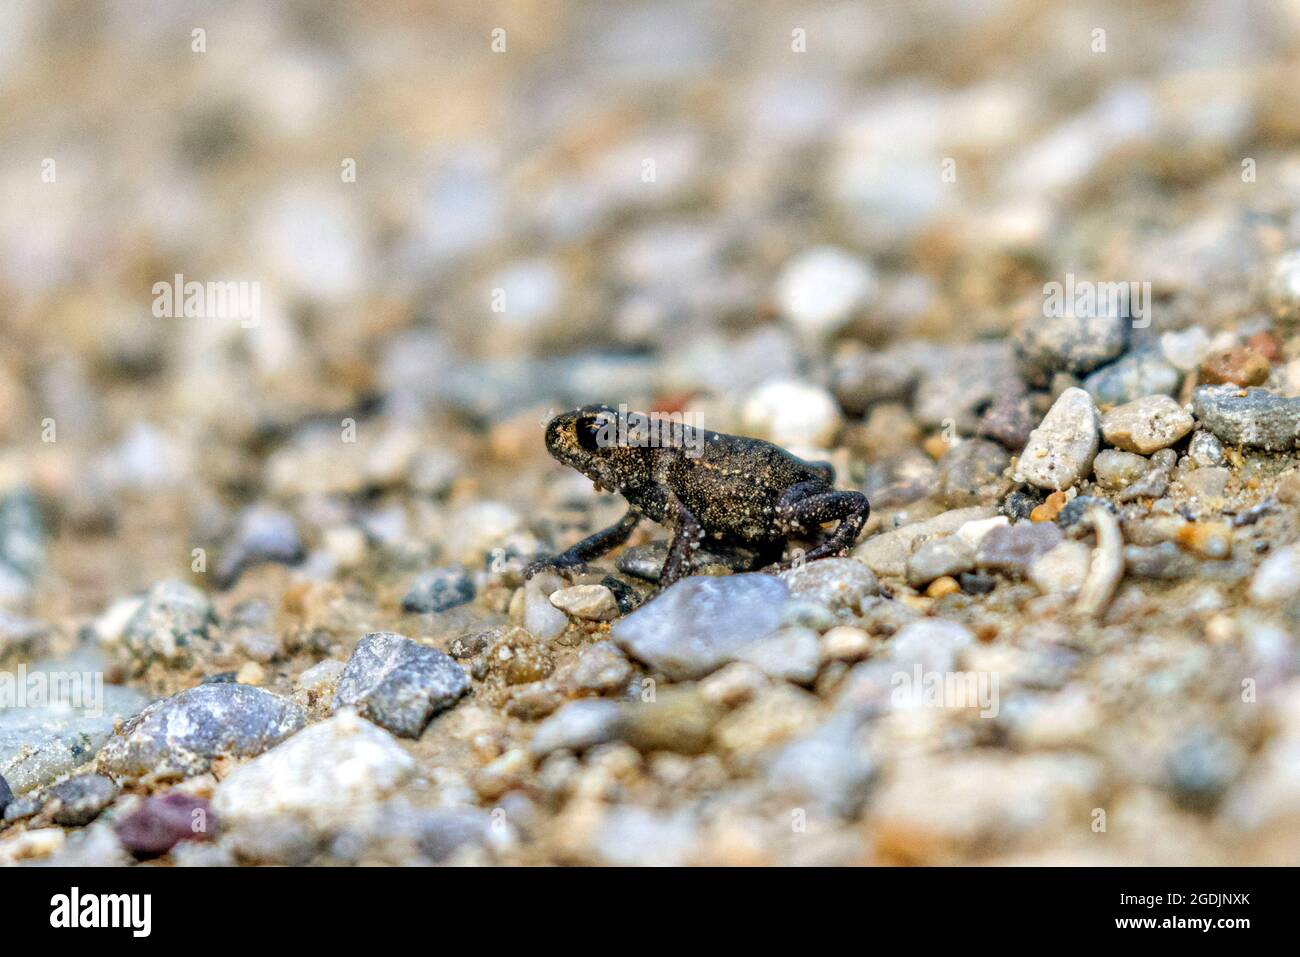 European common toad (Bufo bufo), 1cm, just completed metamorphosis, crossing a street, Germany, Bavaria Stock Photo